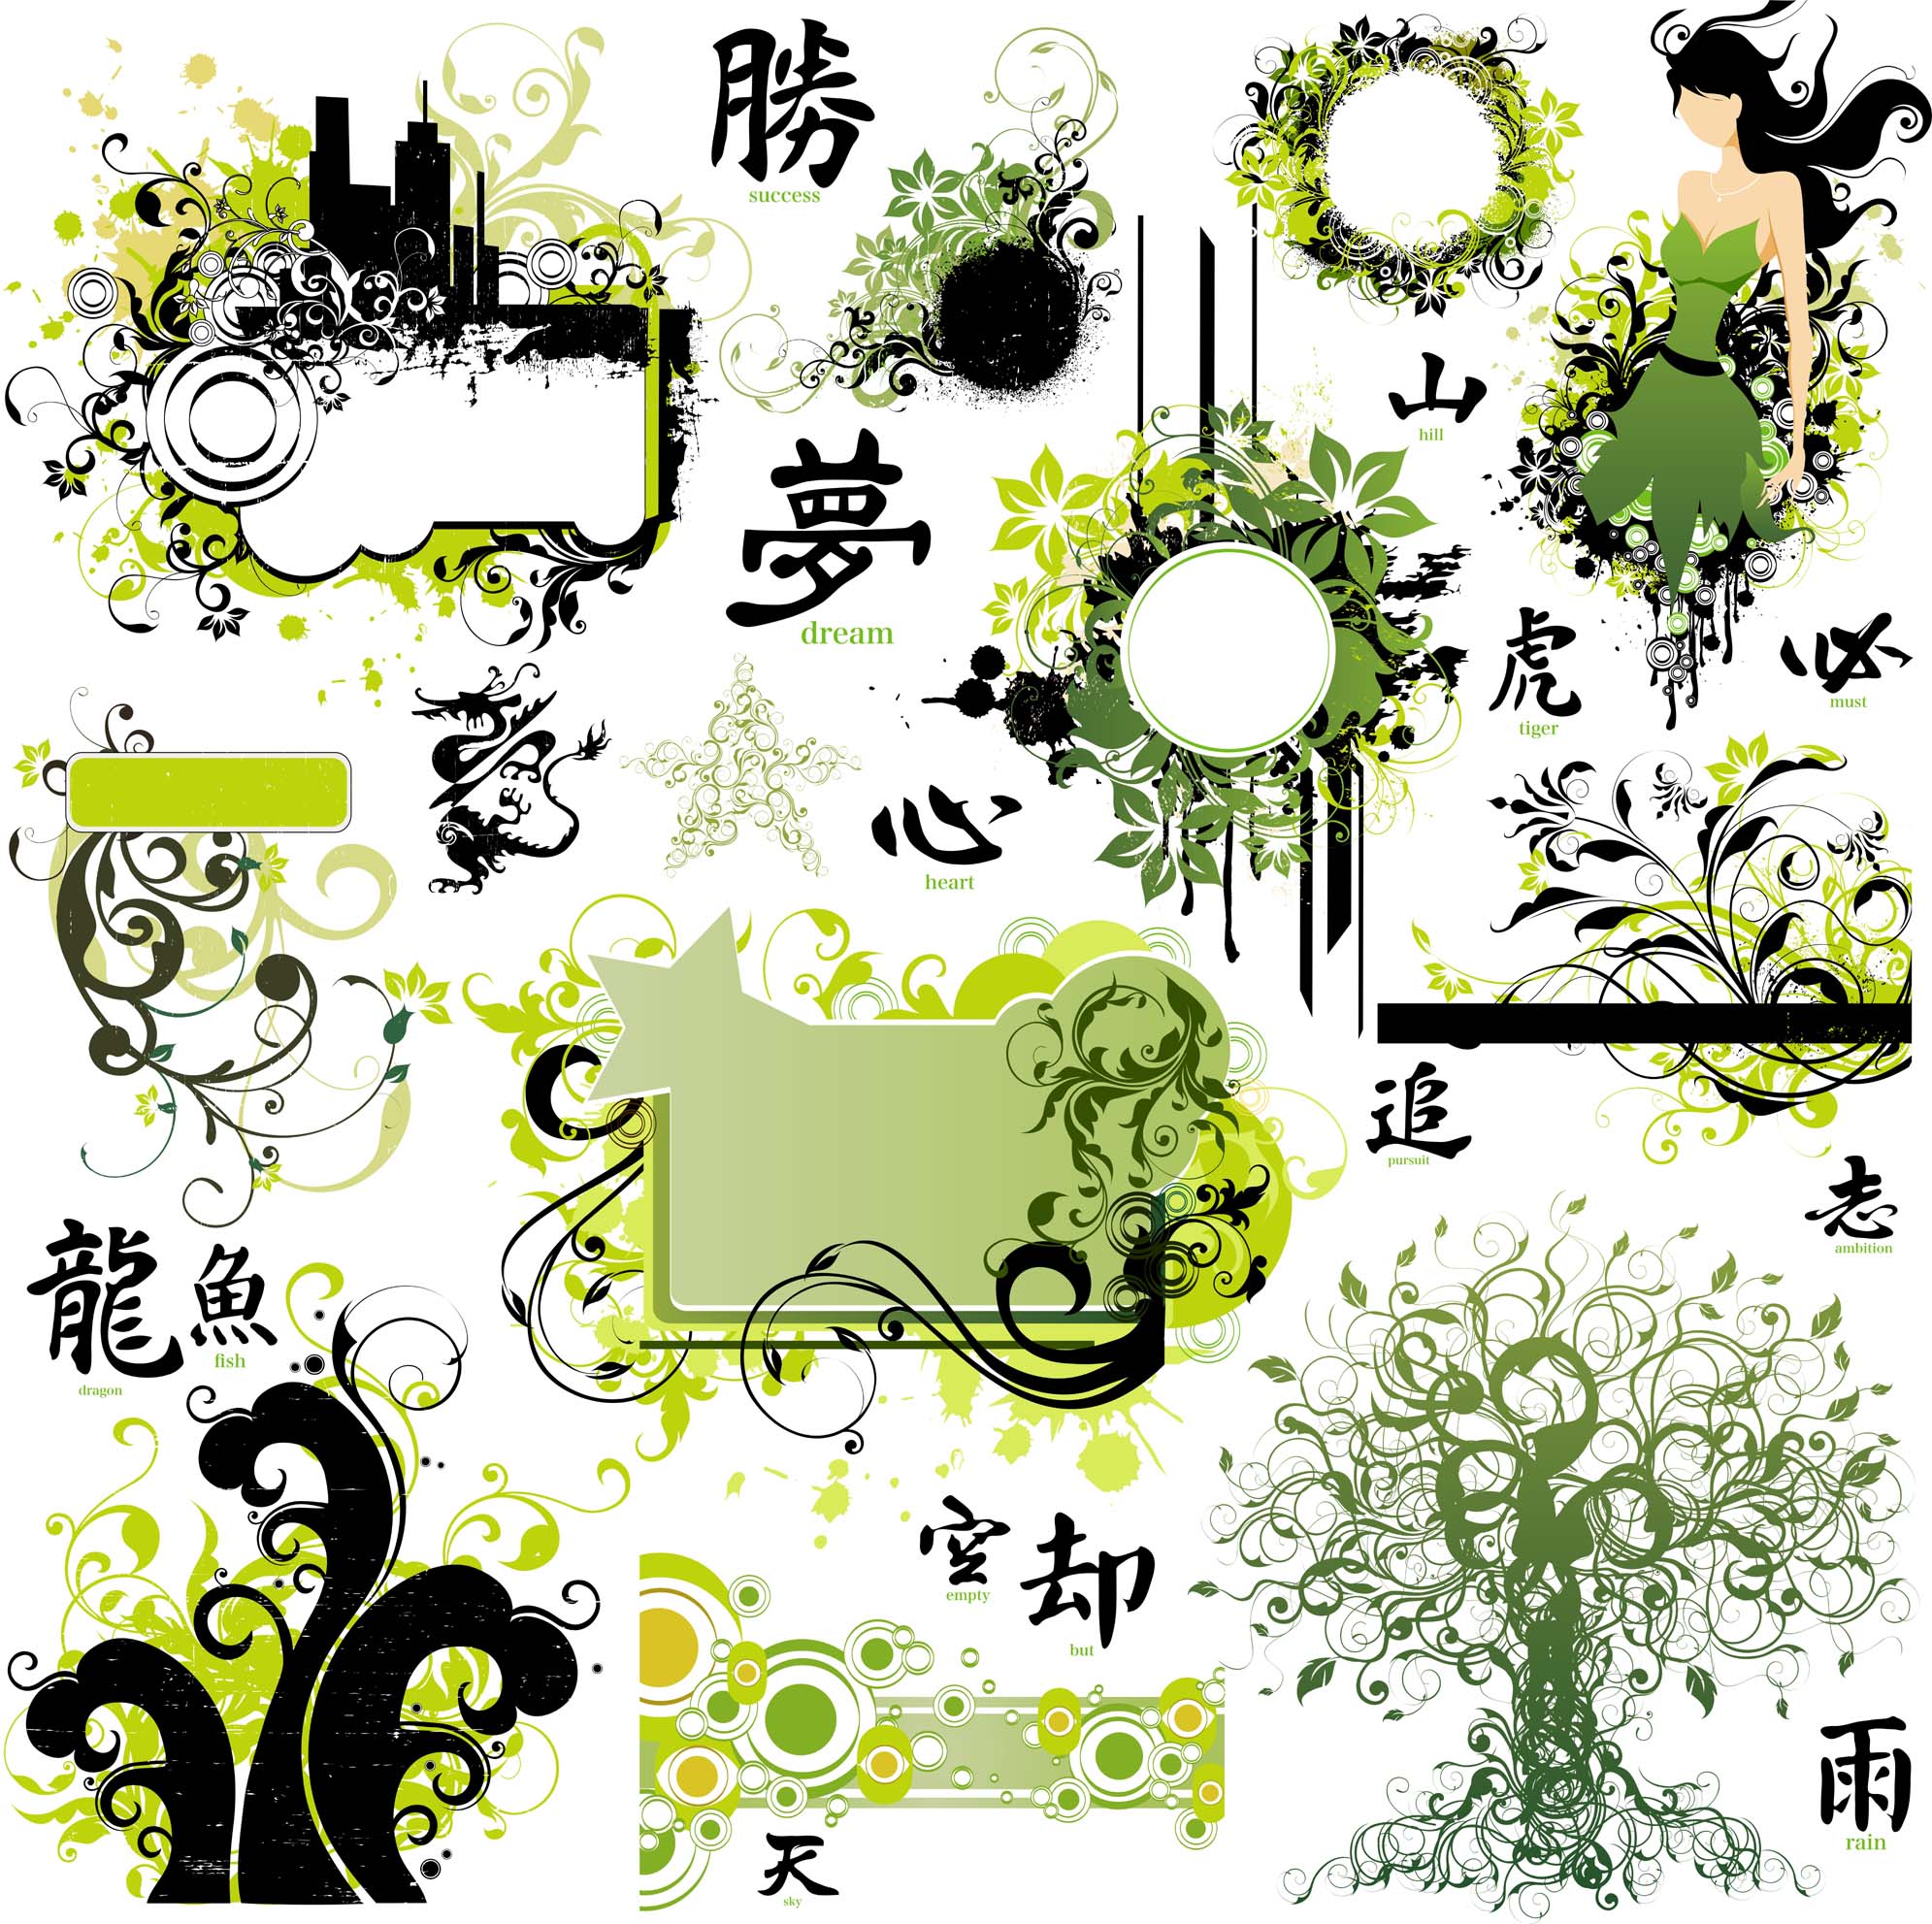 free vector clipart for corel draw - photo #15